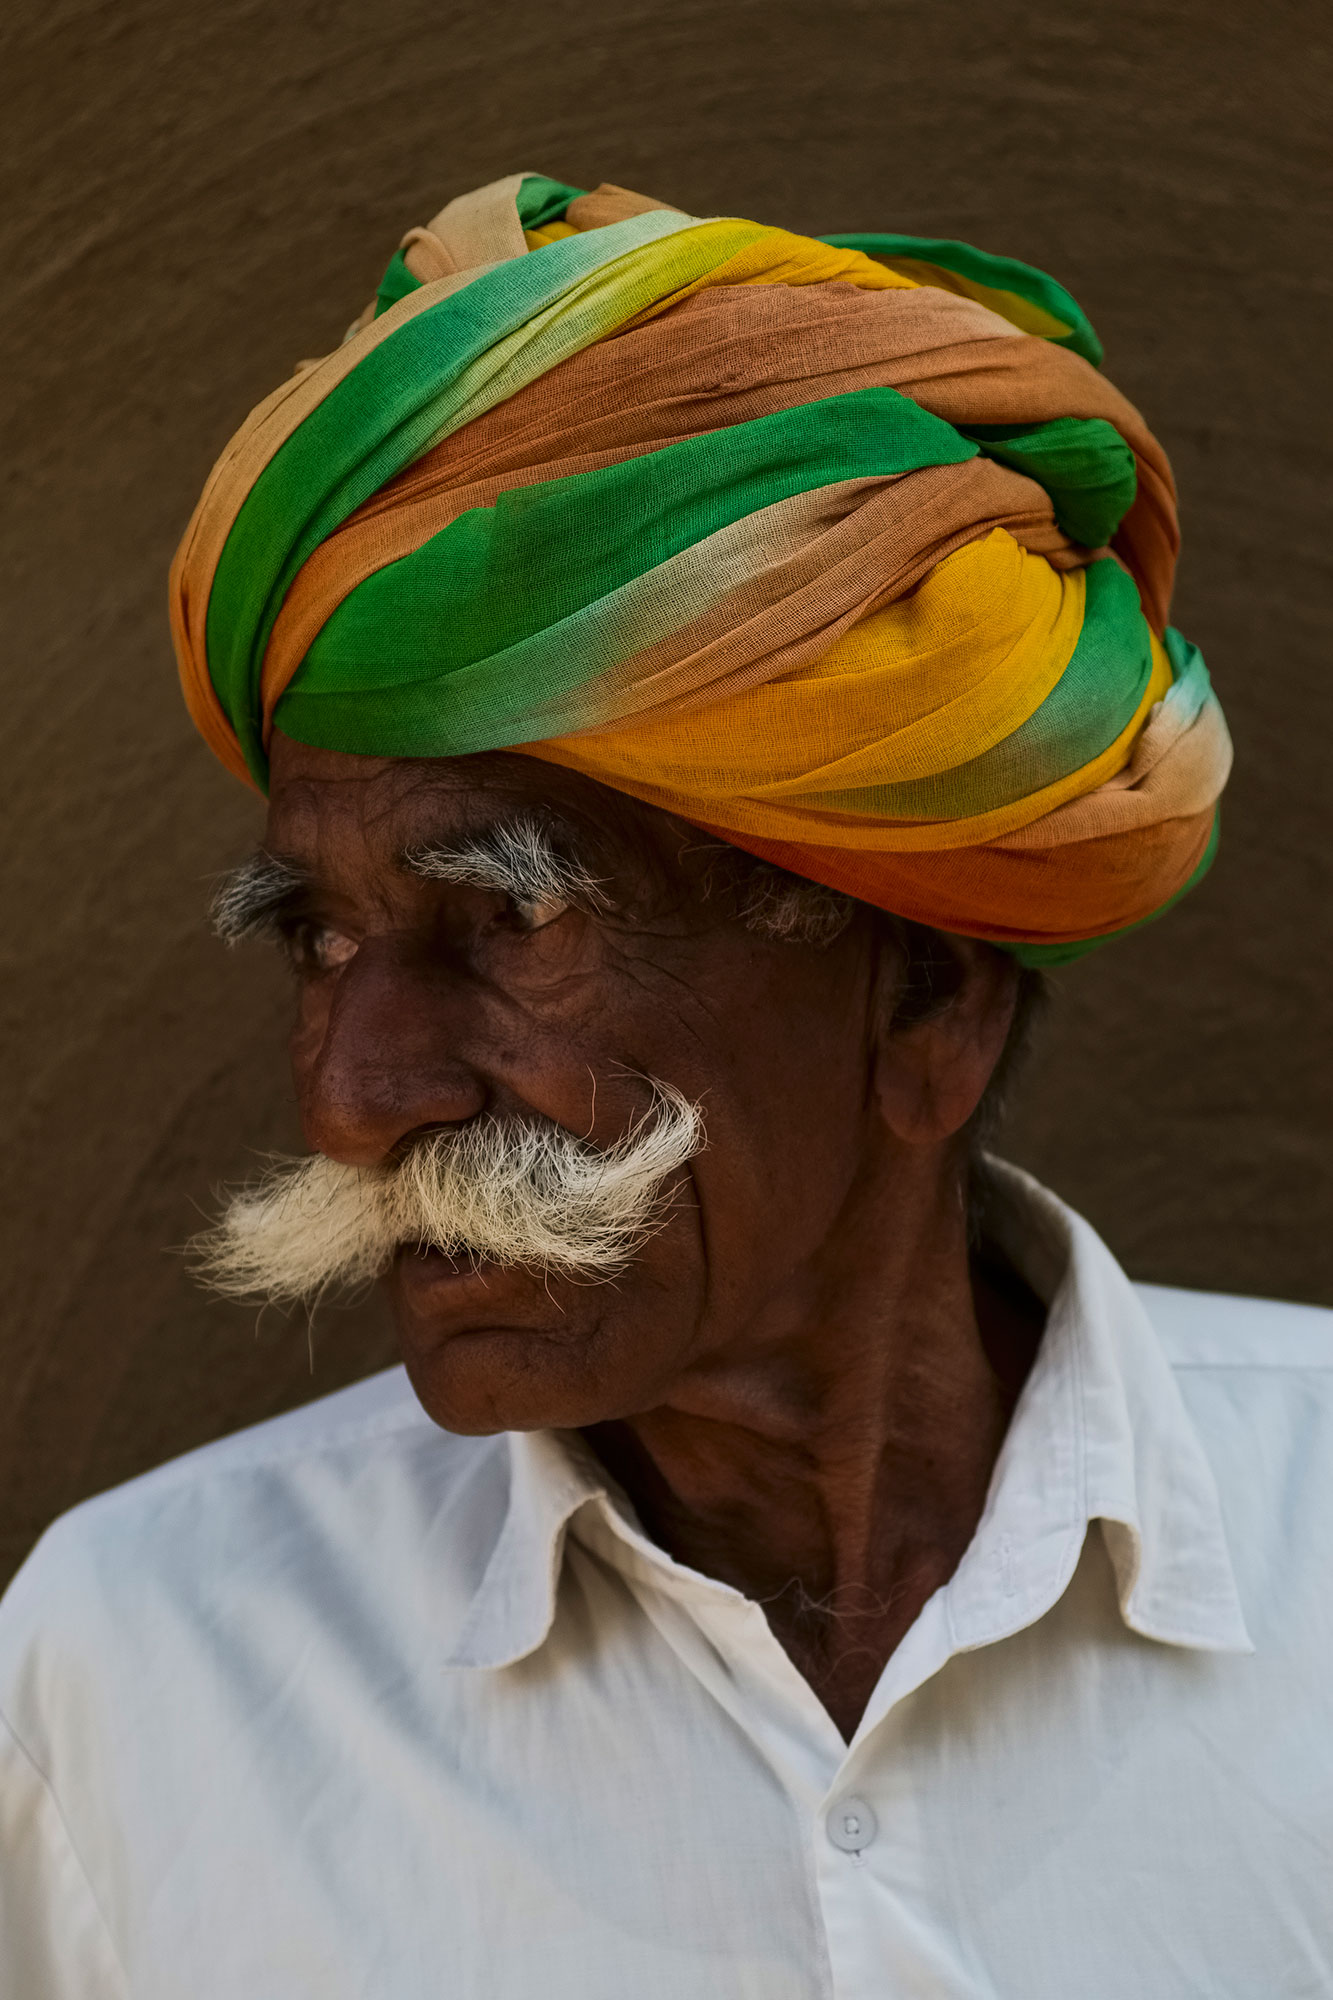 Rajasthan portrait of a man, India